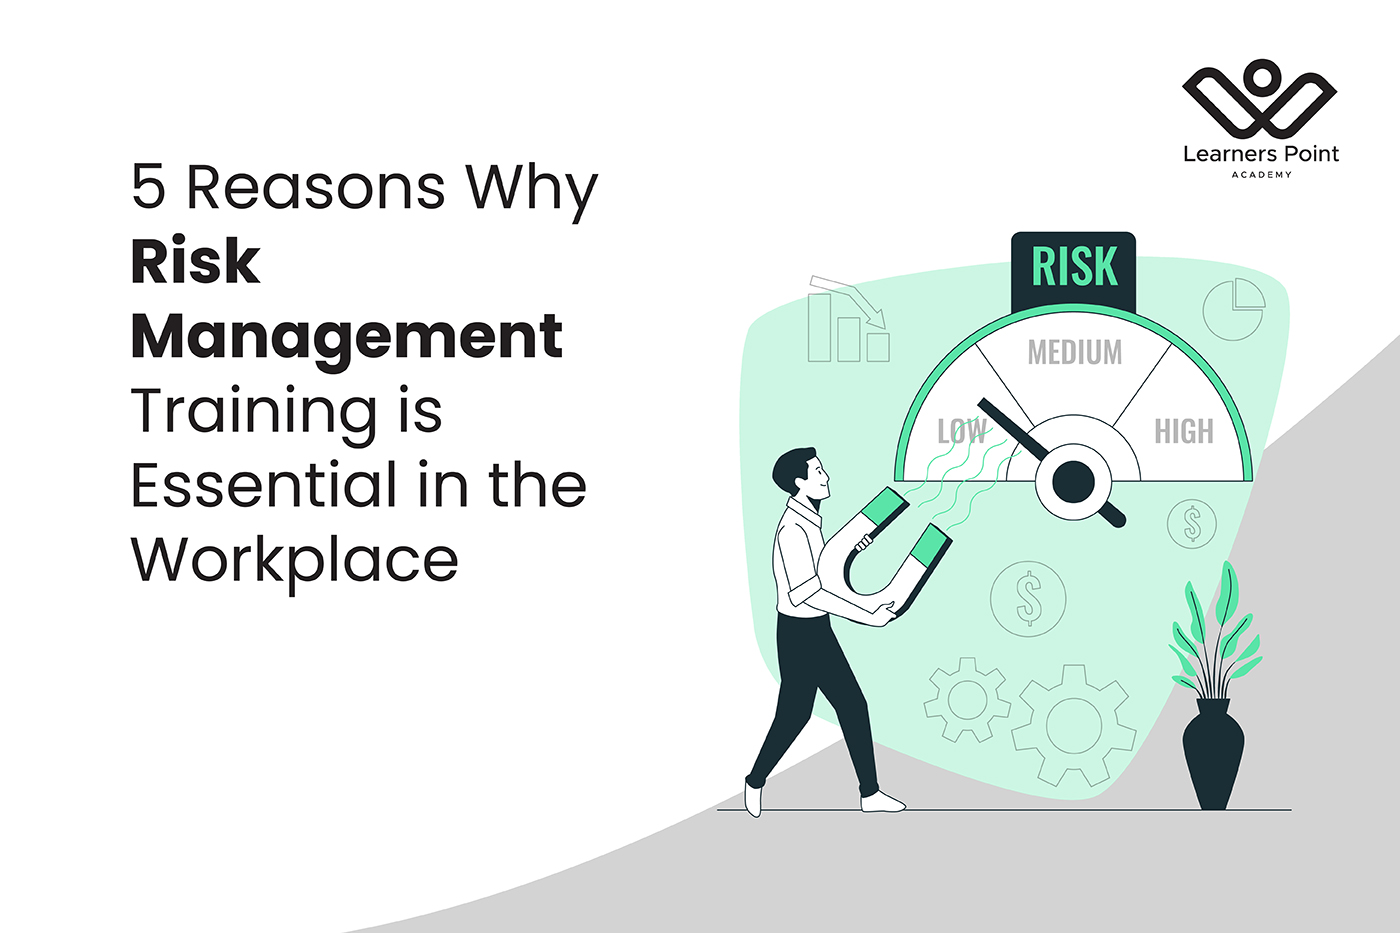 5 Reasons Why Risk Management Training is Essential in the Workplace